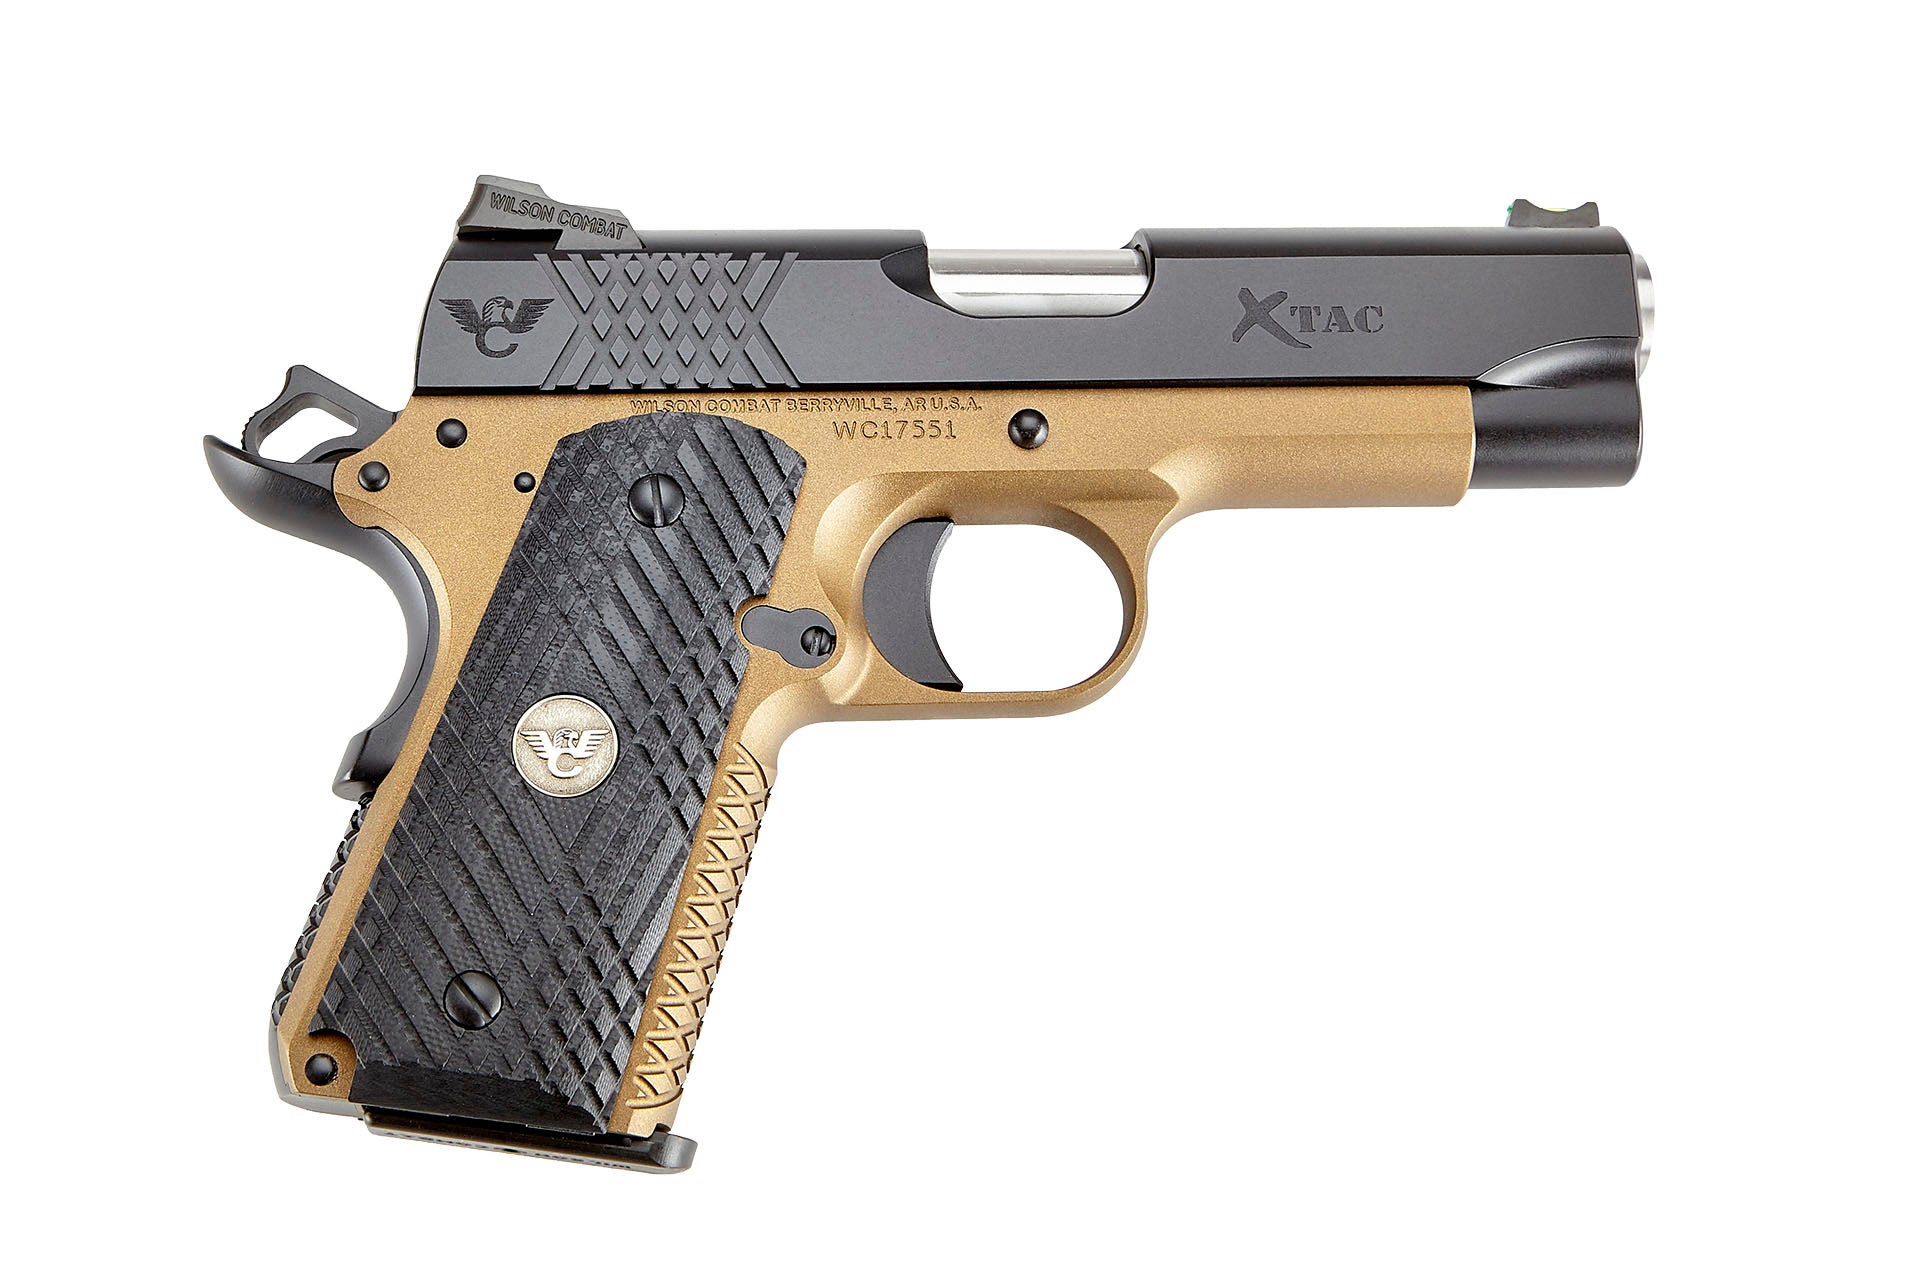 Wilson Combat X-Tac Compact Review: Pros and cons of the X-Tac Compact